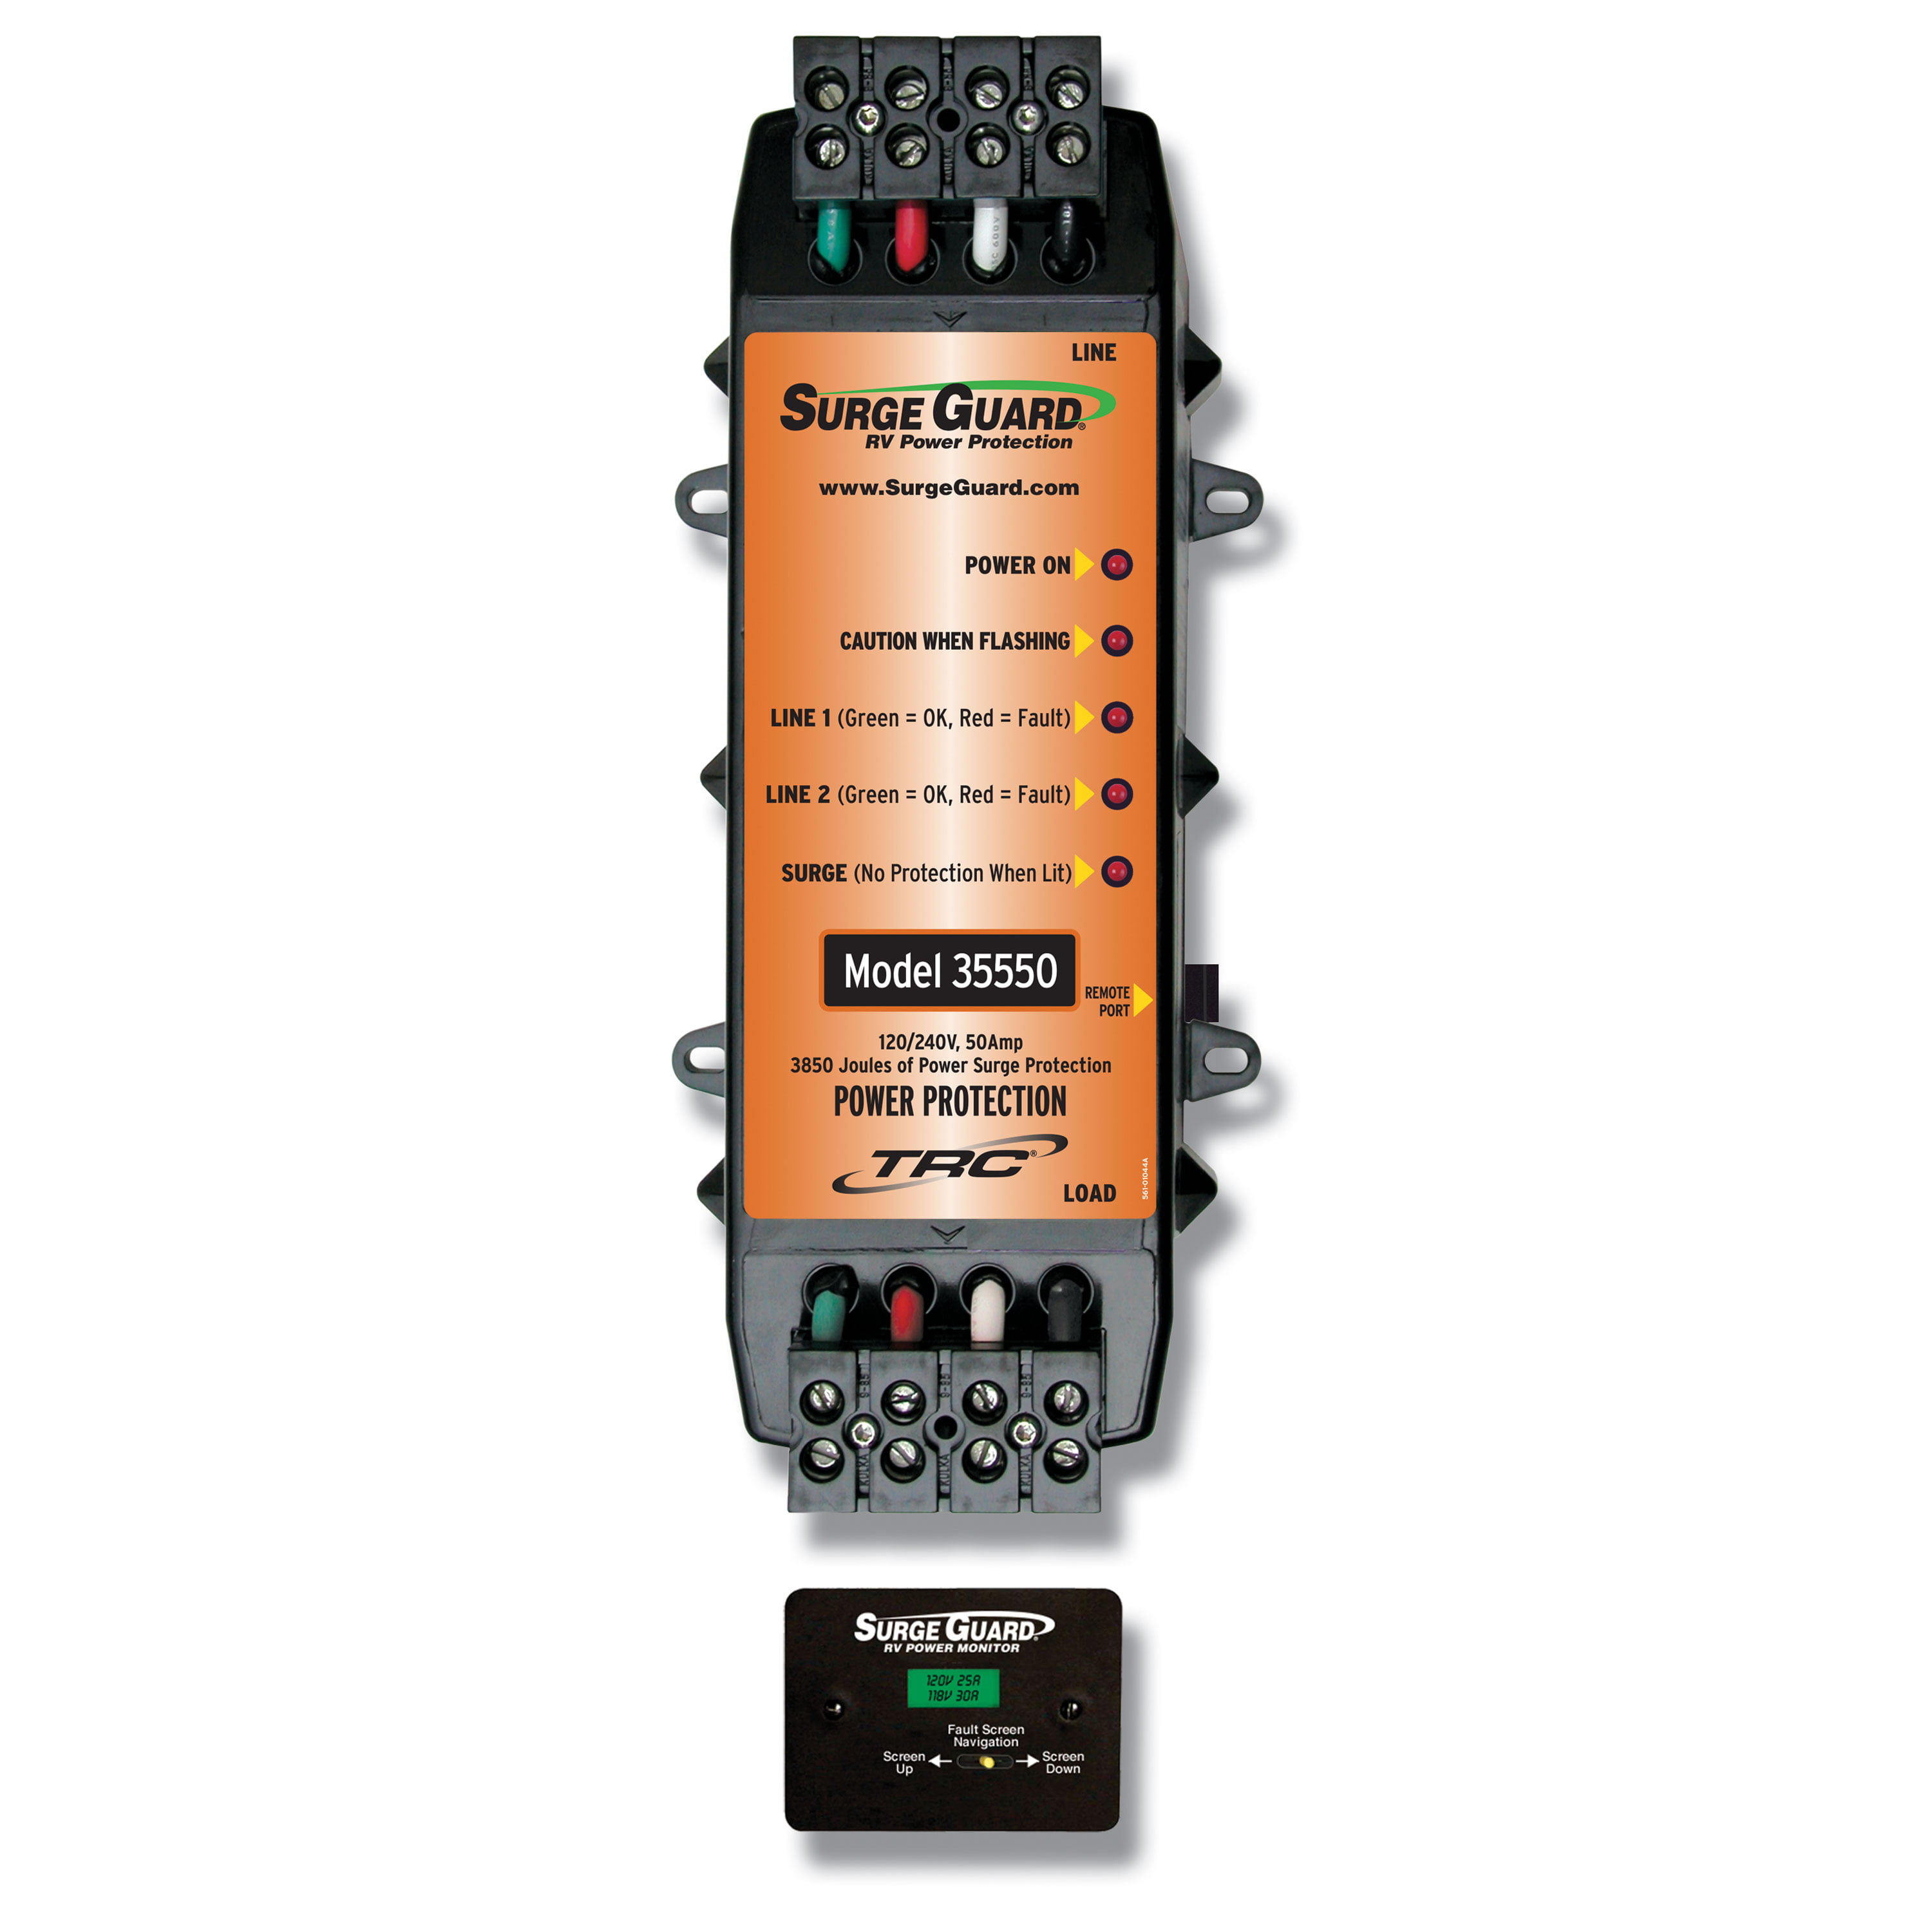 Surge Guard 34850 Portable Model with LCD Display 50 Amp